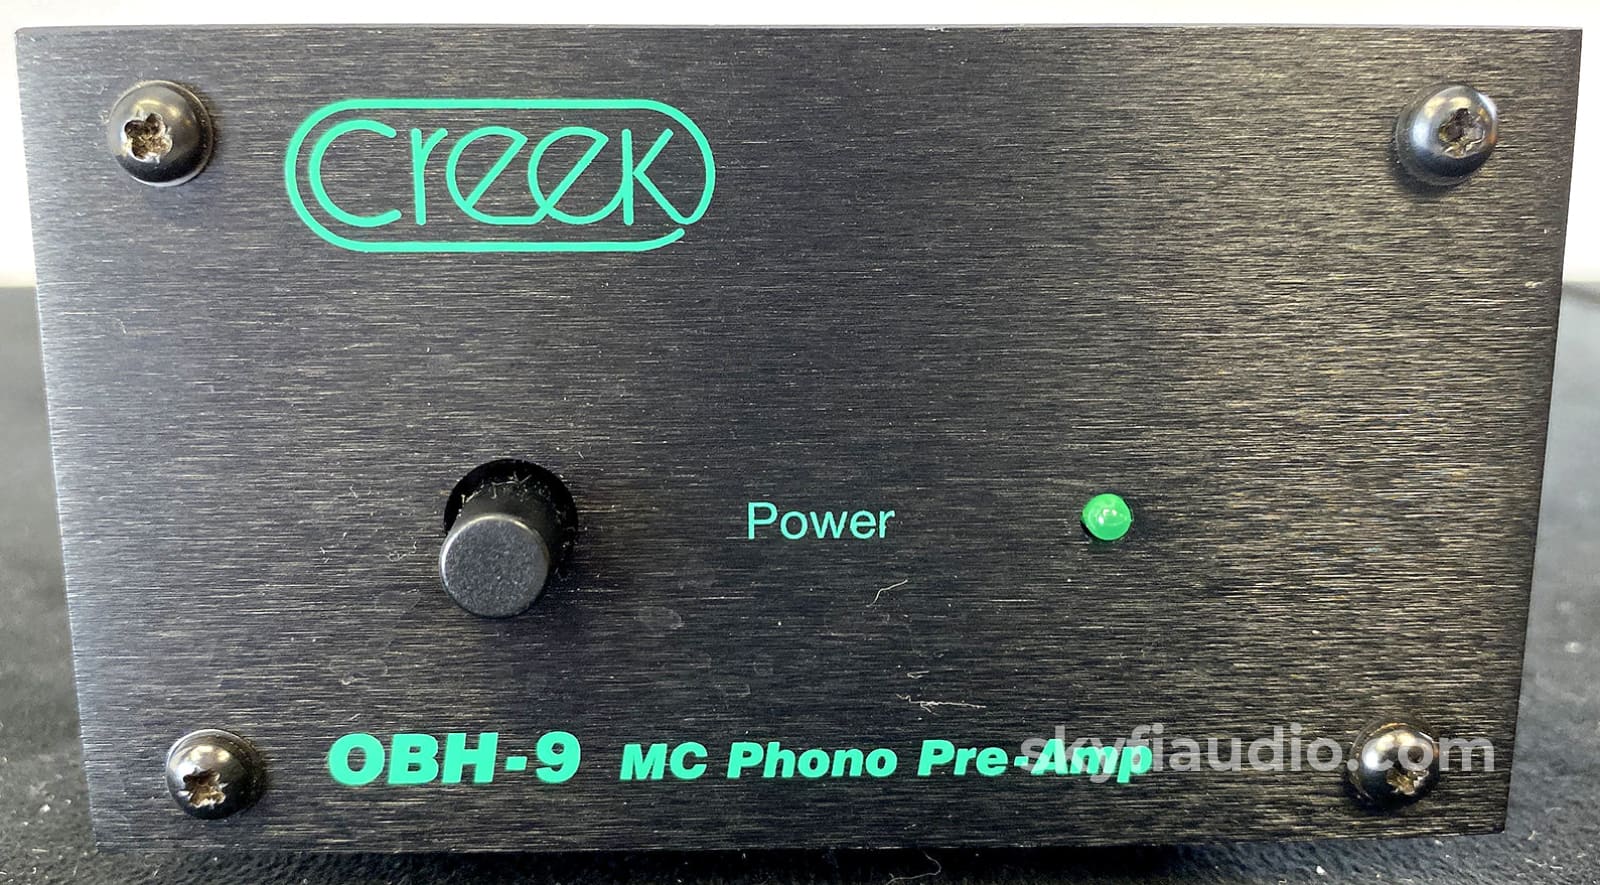 Creek Audio Limited Obh-9 Mc (Moving-Coil) Phono Preamplifier